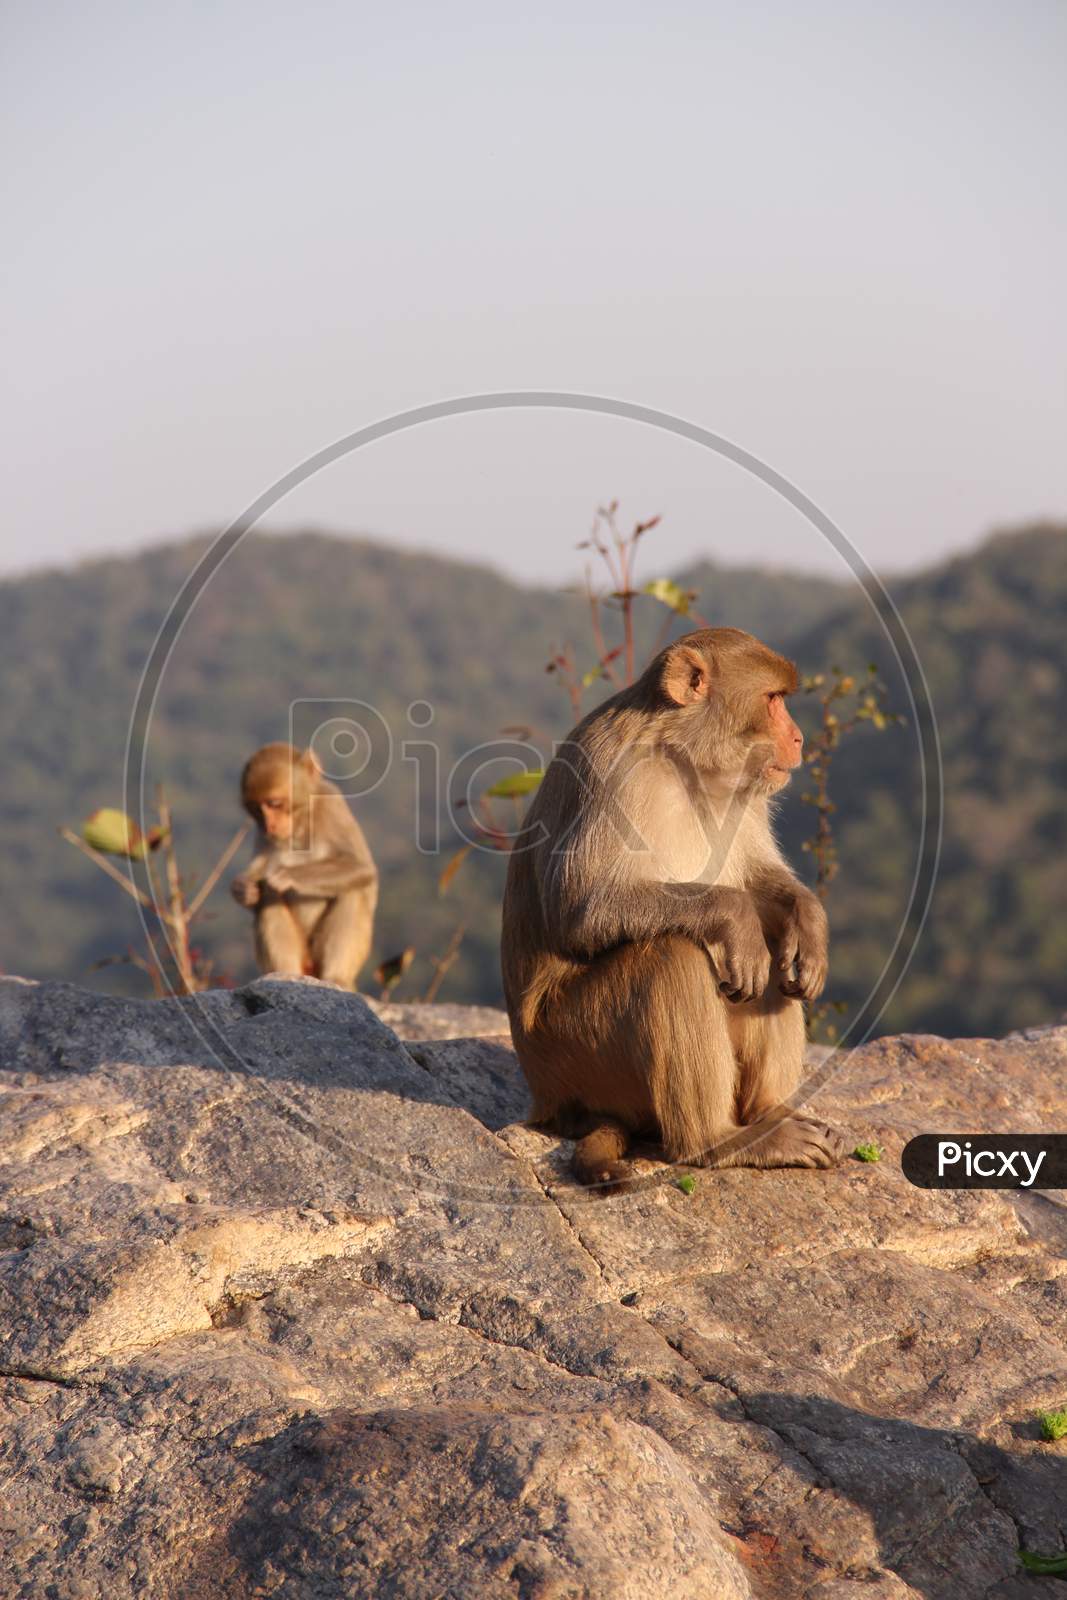 Later in the afternoon the monkey is sitting on the top of the hill at hundru waterfalls Ranchi Jharkhand in India